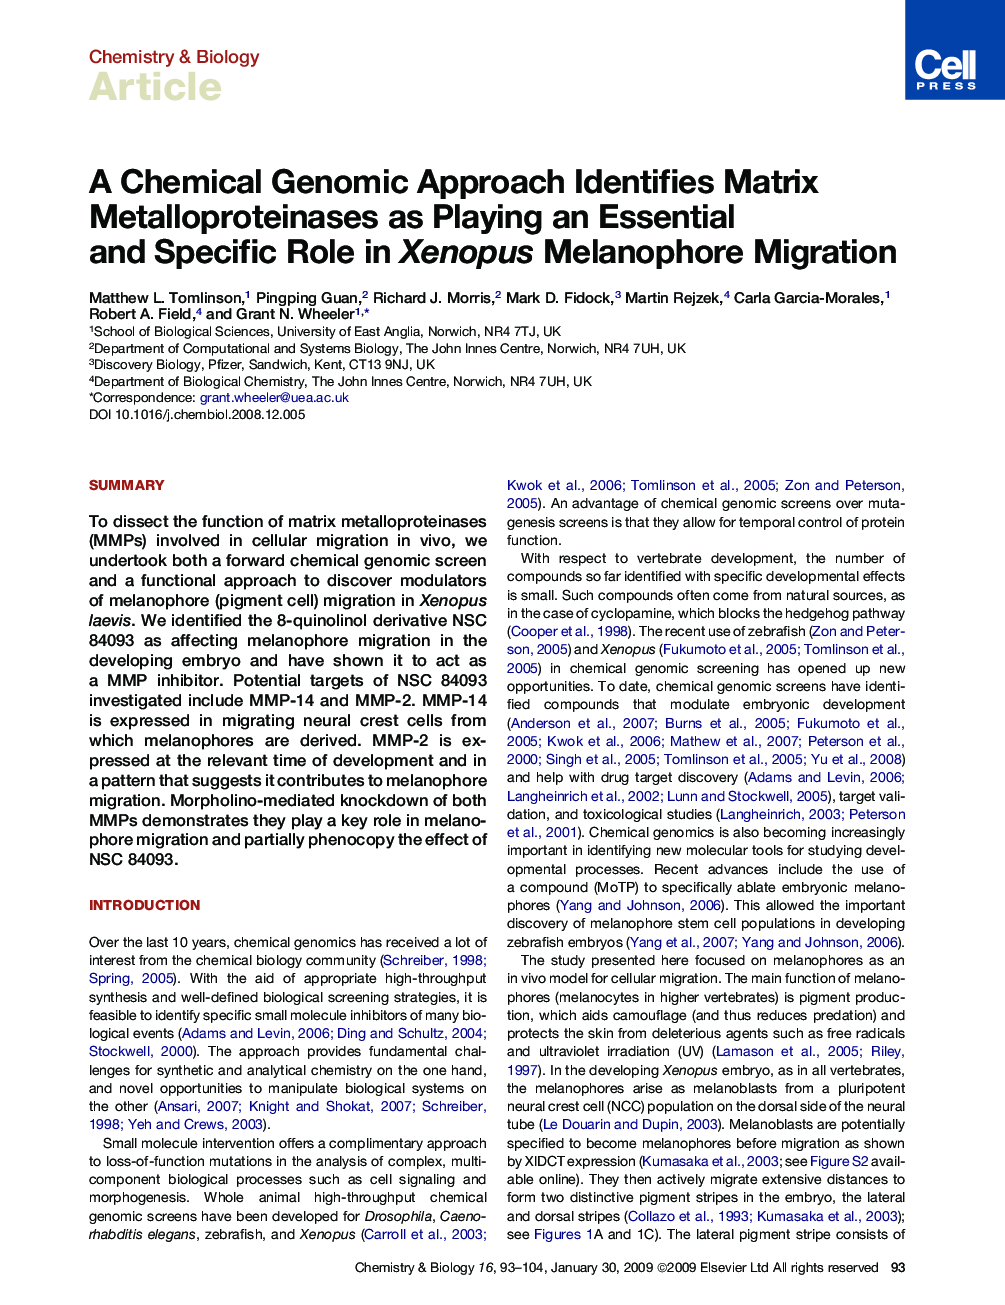 A Chemical Genomic Approach Identifies Matrix Metalloproteinases as Playing an Essential and Specific Role in Xenopus Melanophore Migration